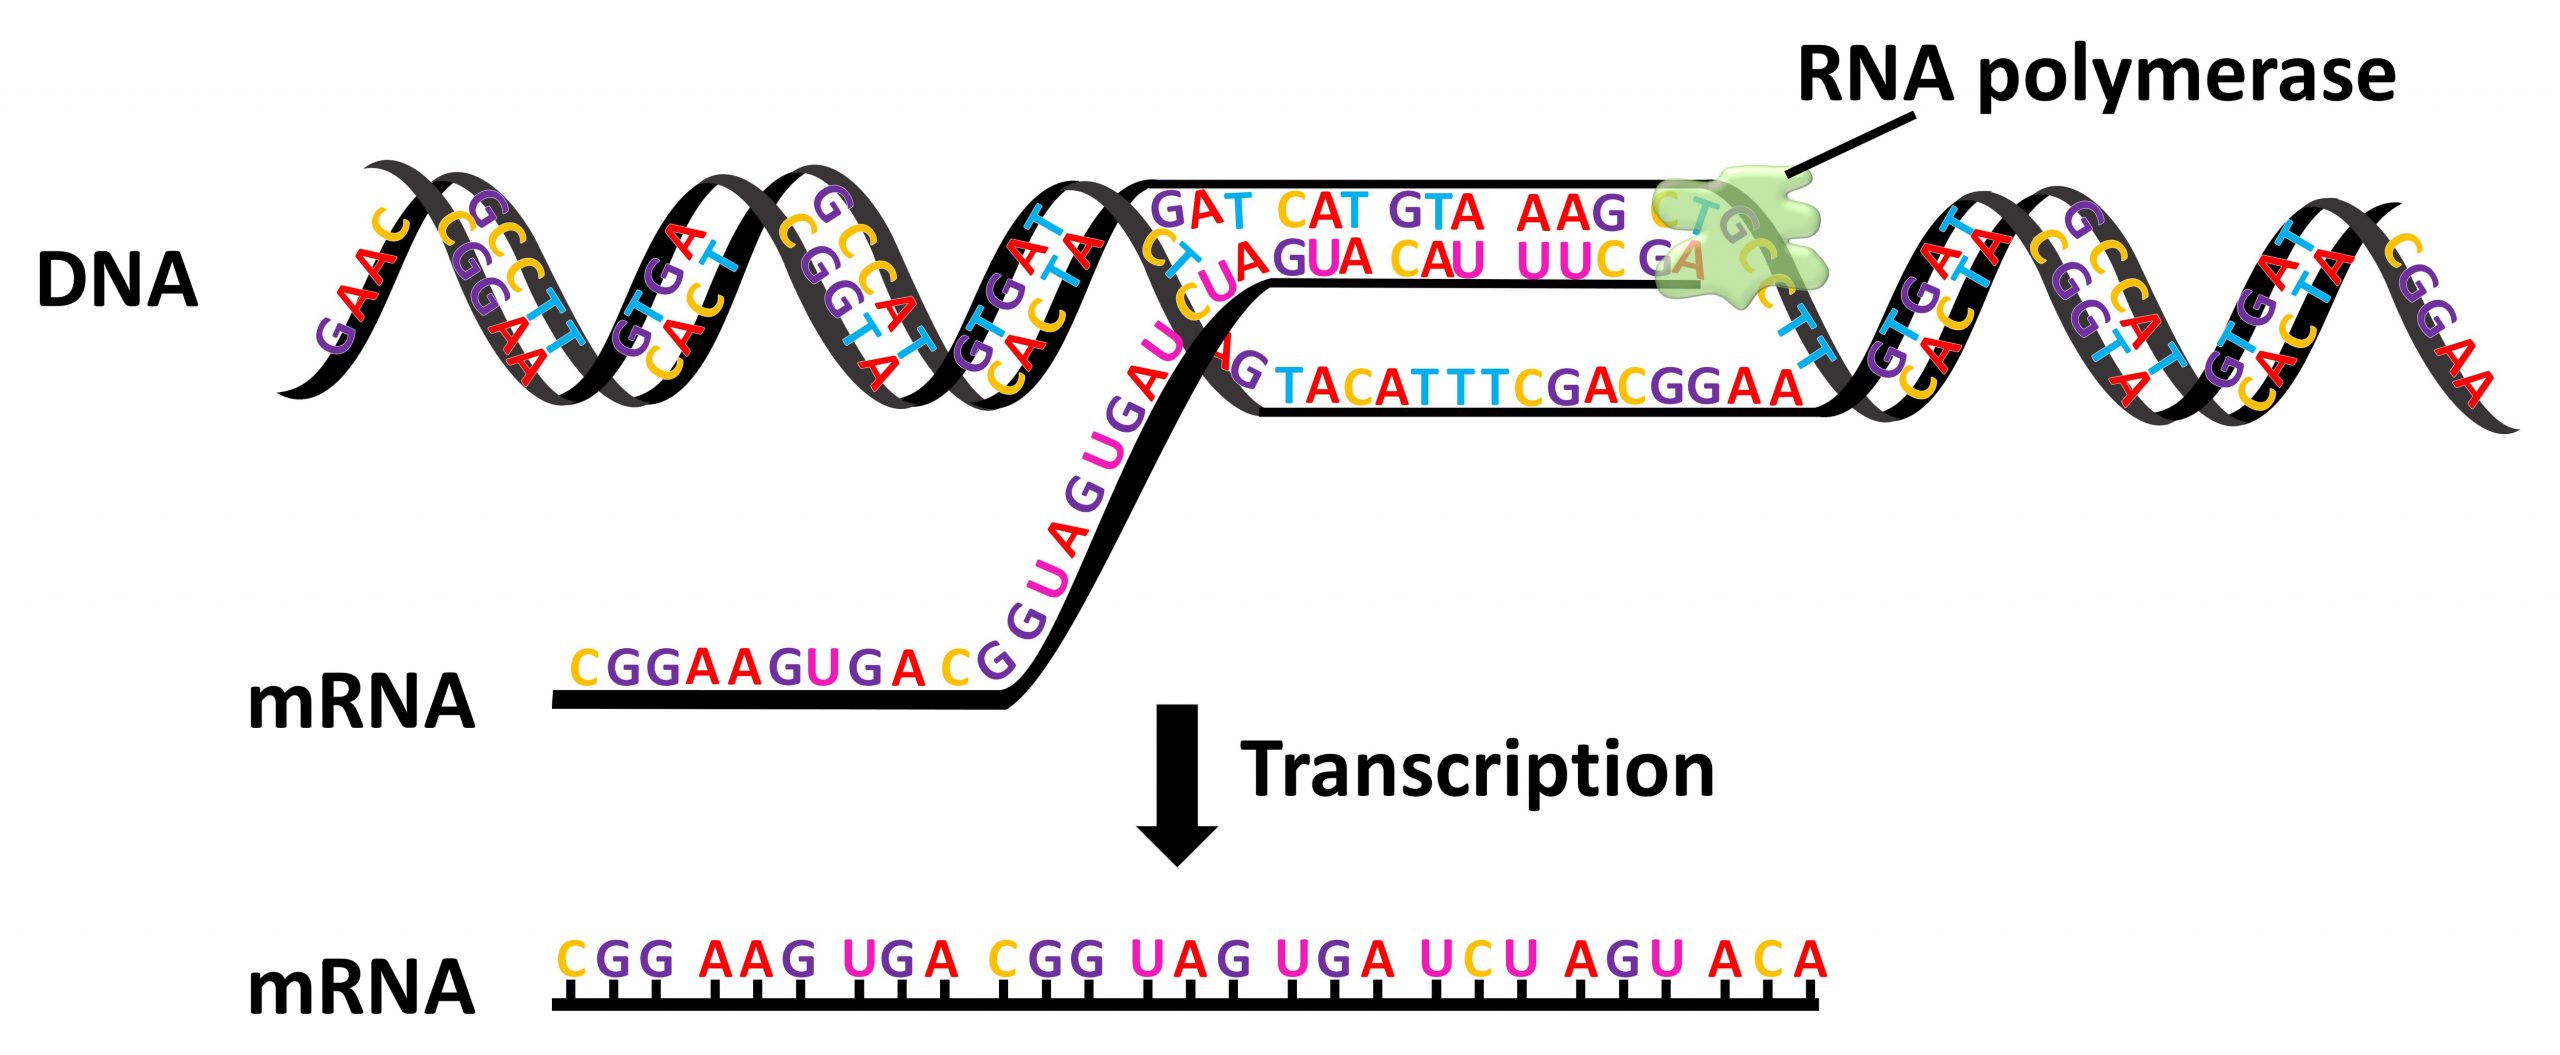 DNA sequences are seen up close in visual abstraction.